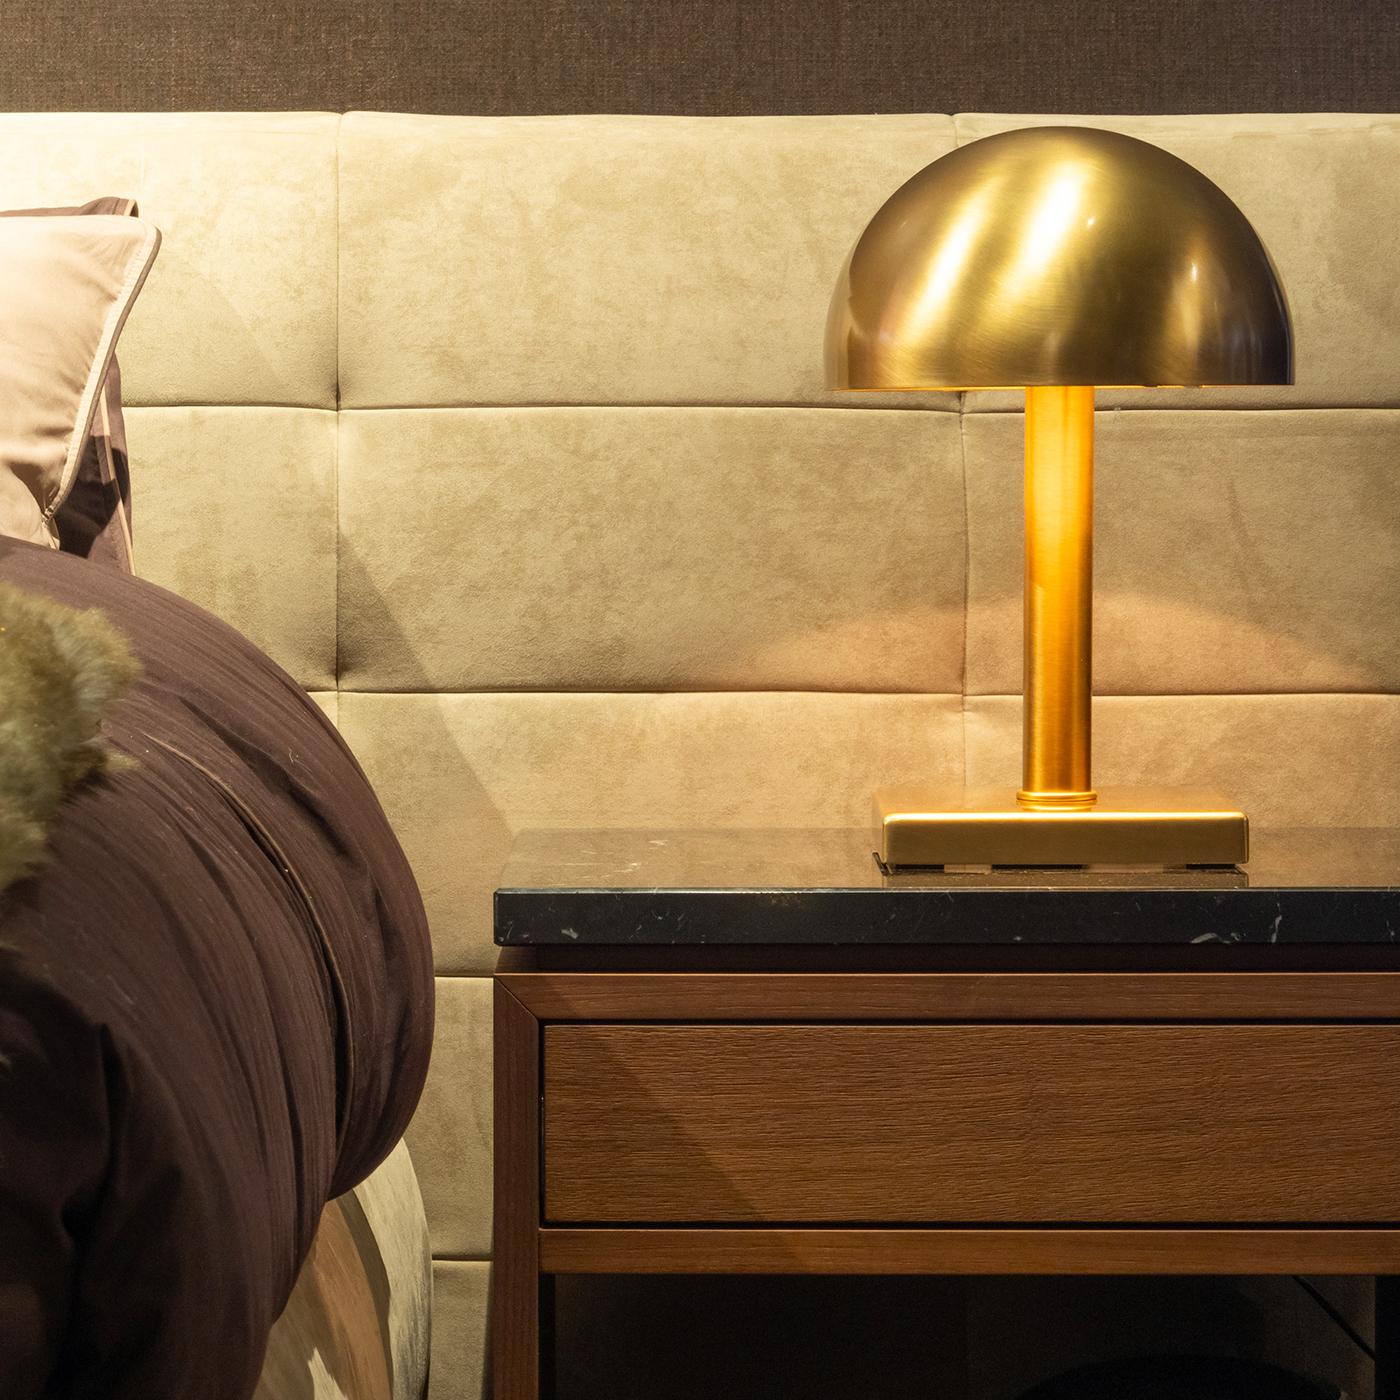 Part of the Blake collection, this table lamp is a stylish combination of pure geometric volumes. Its square base and cylindrical stem support a semi-spherical shade in bronzed brass that creates a diffused ambiance light.